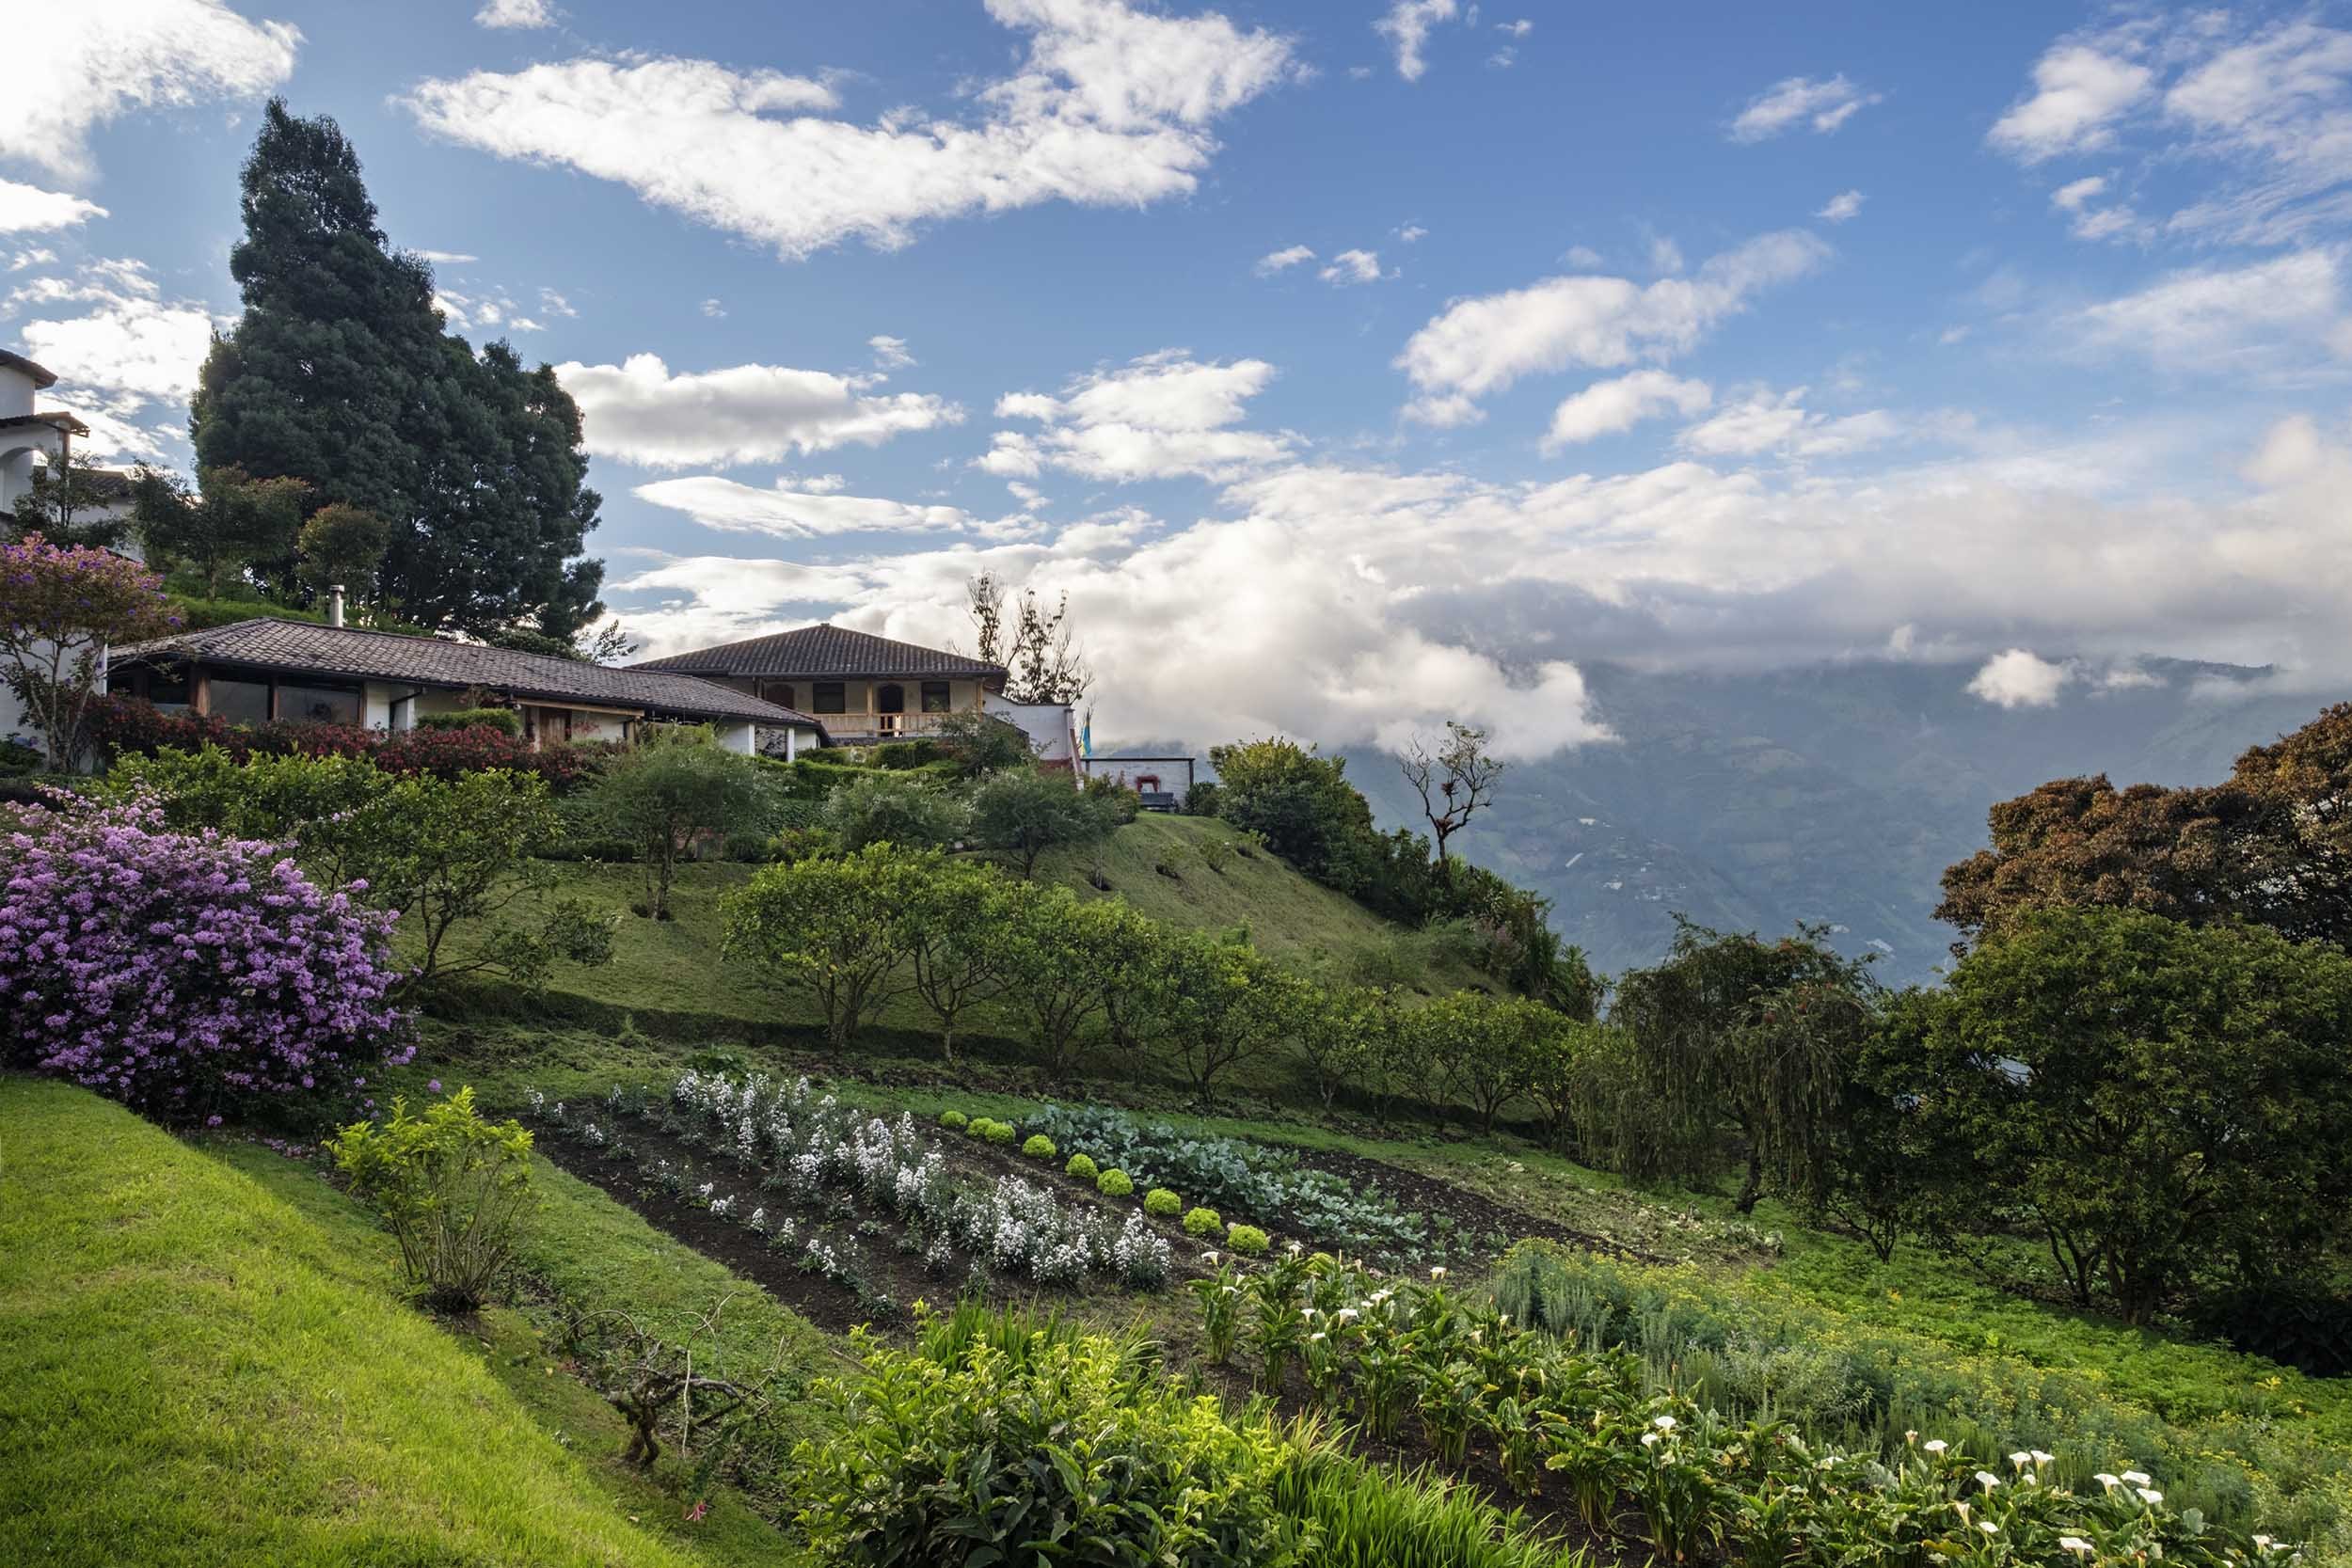 Organic orchards and view - Luna Volcan - Hotel in Banos Ecuador.jpg